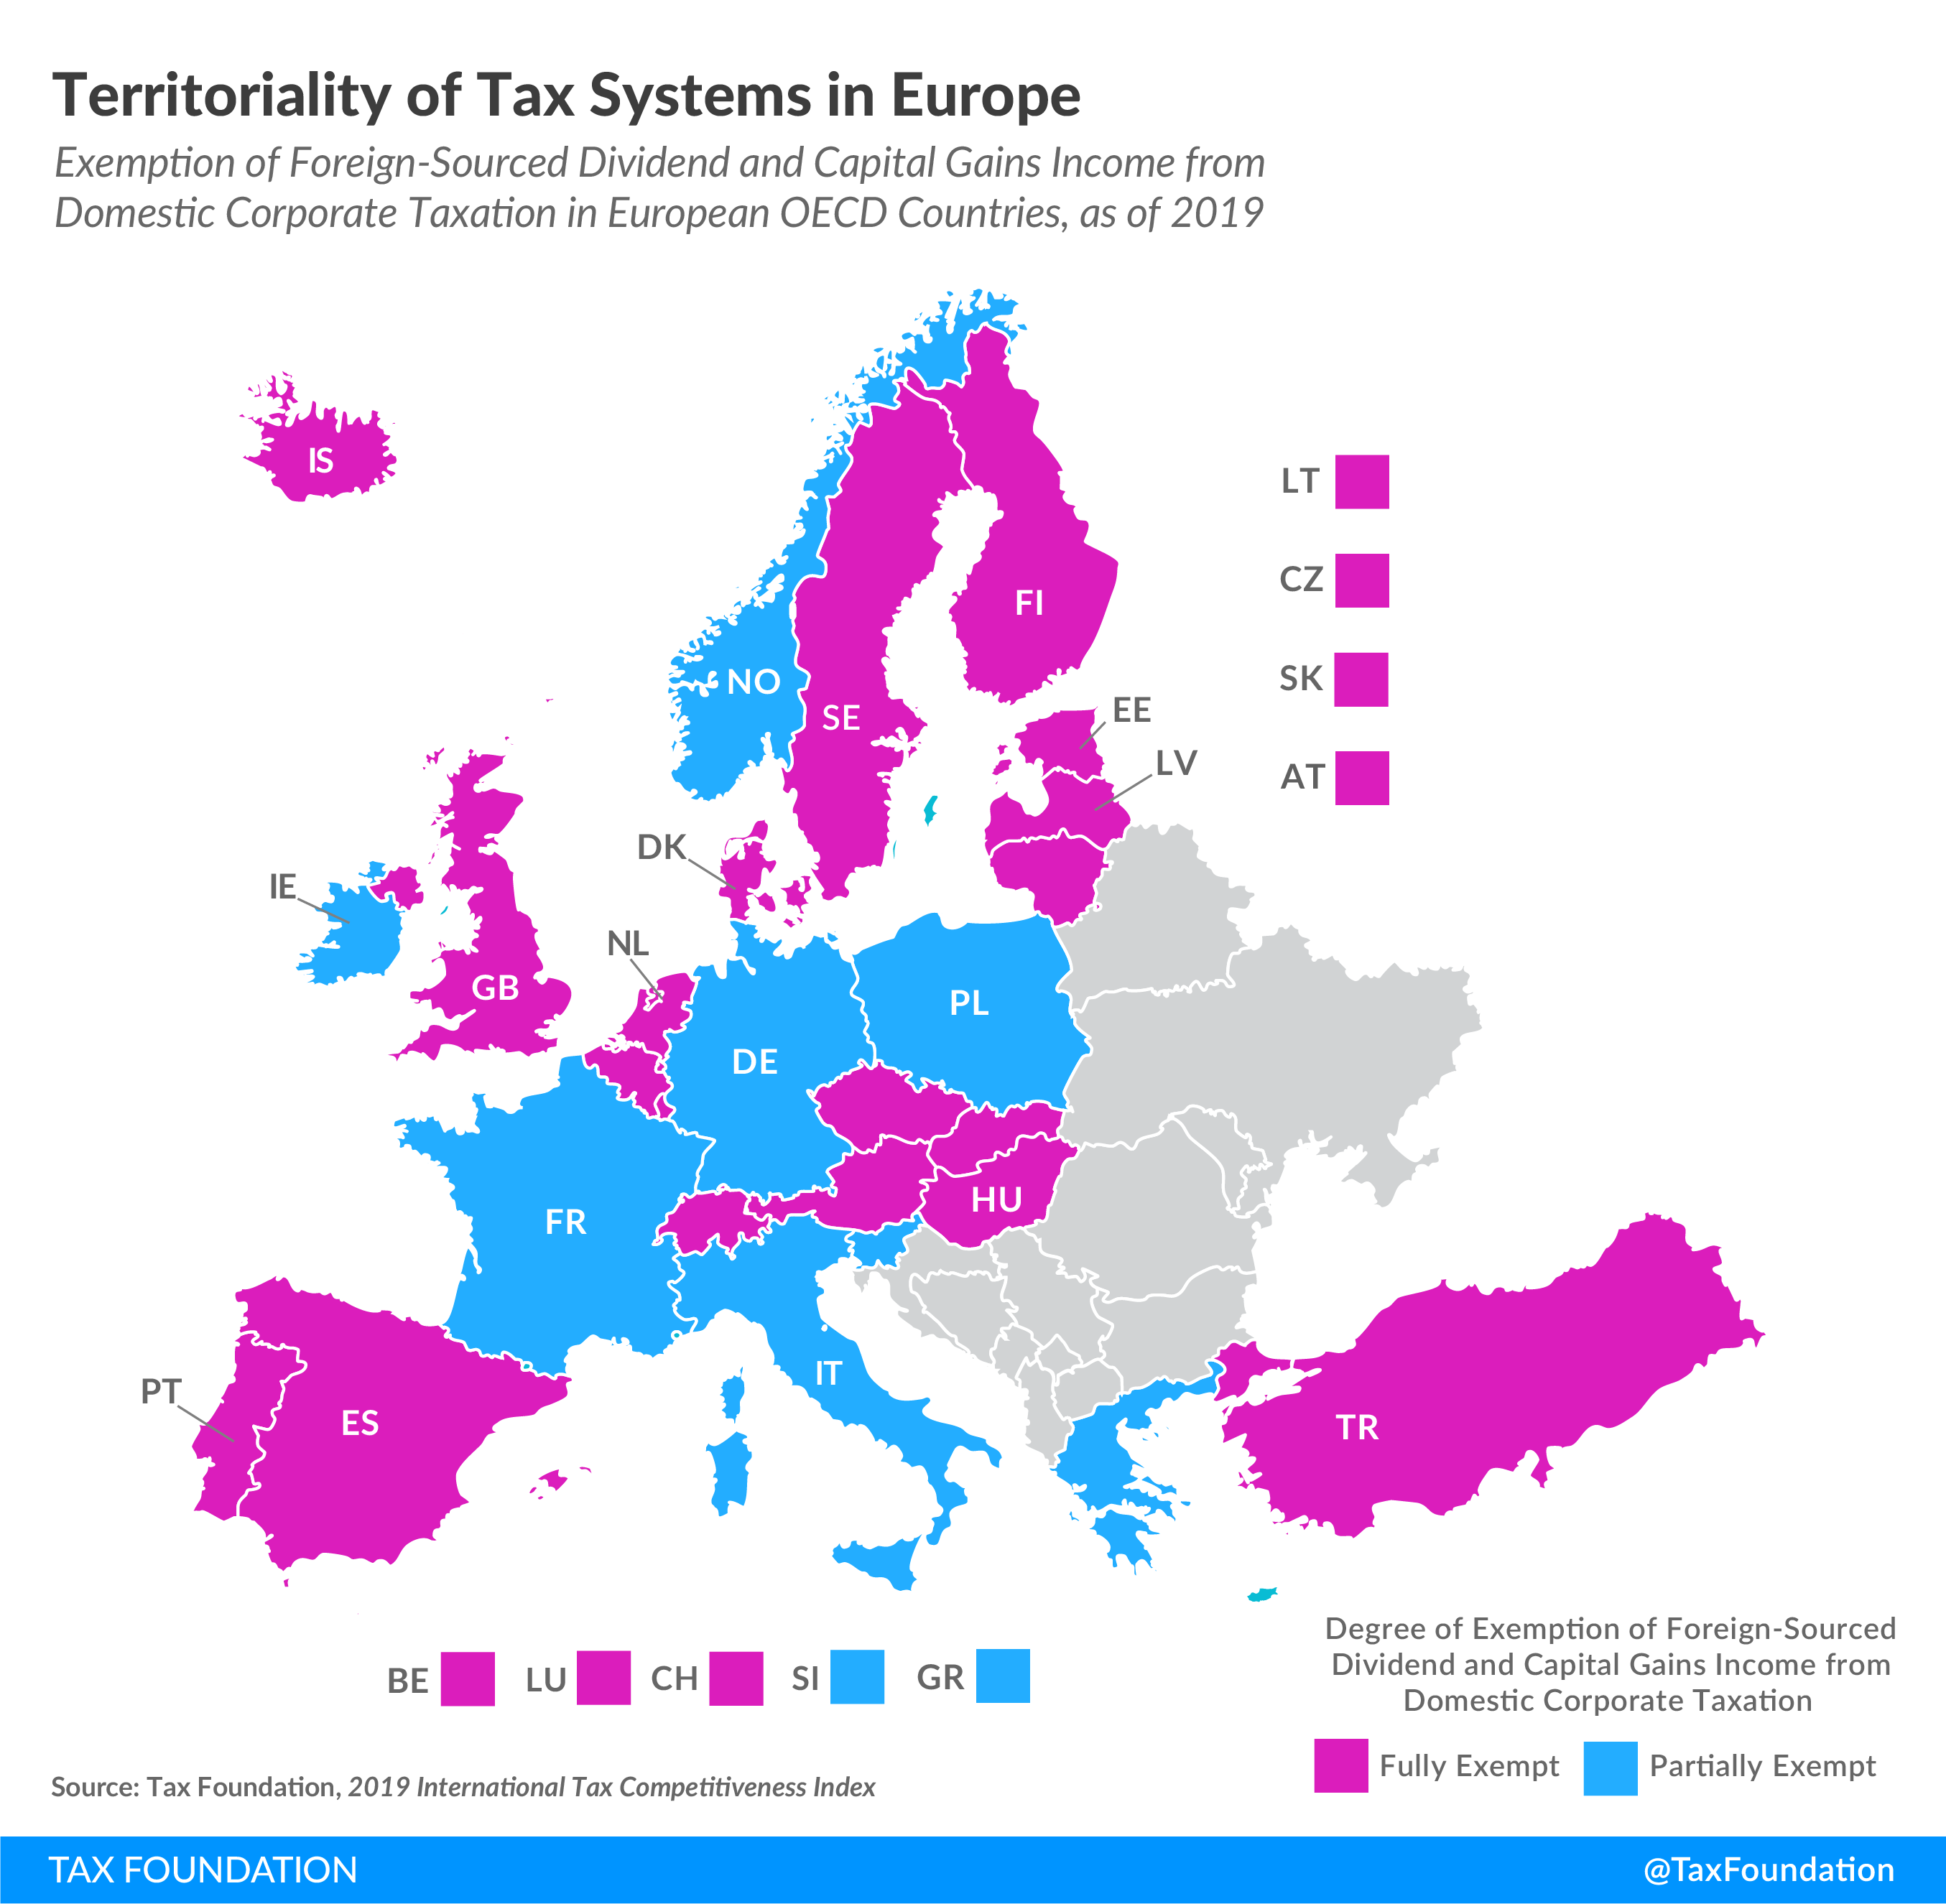 Territoriality of European OECD Countries’ Corporate Tax Systems, as of 2019, Under a territorial tax system, international businesses pay taxes to the countries in which they are located and earn their income. This 